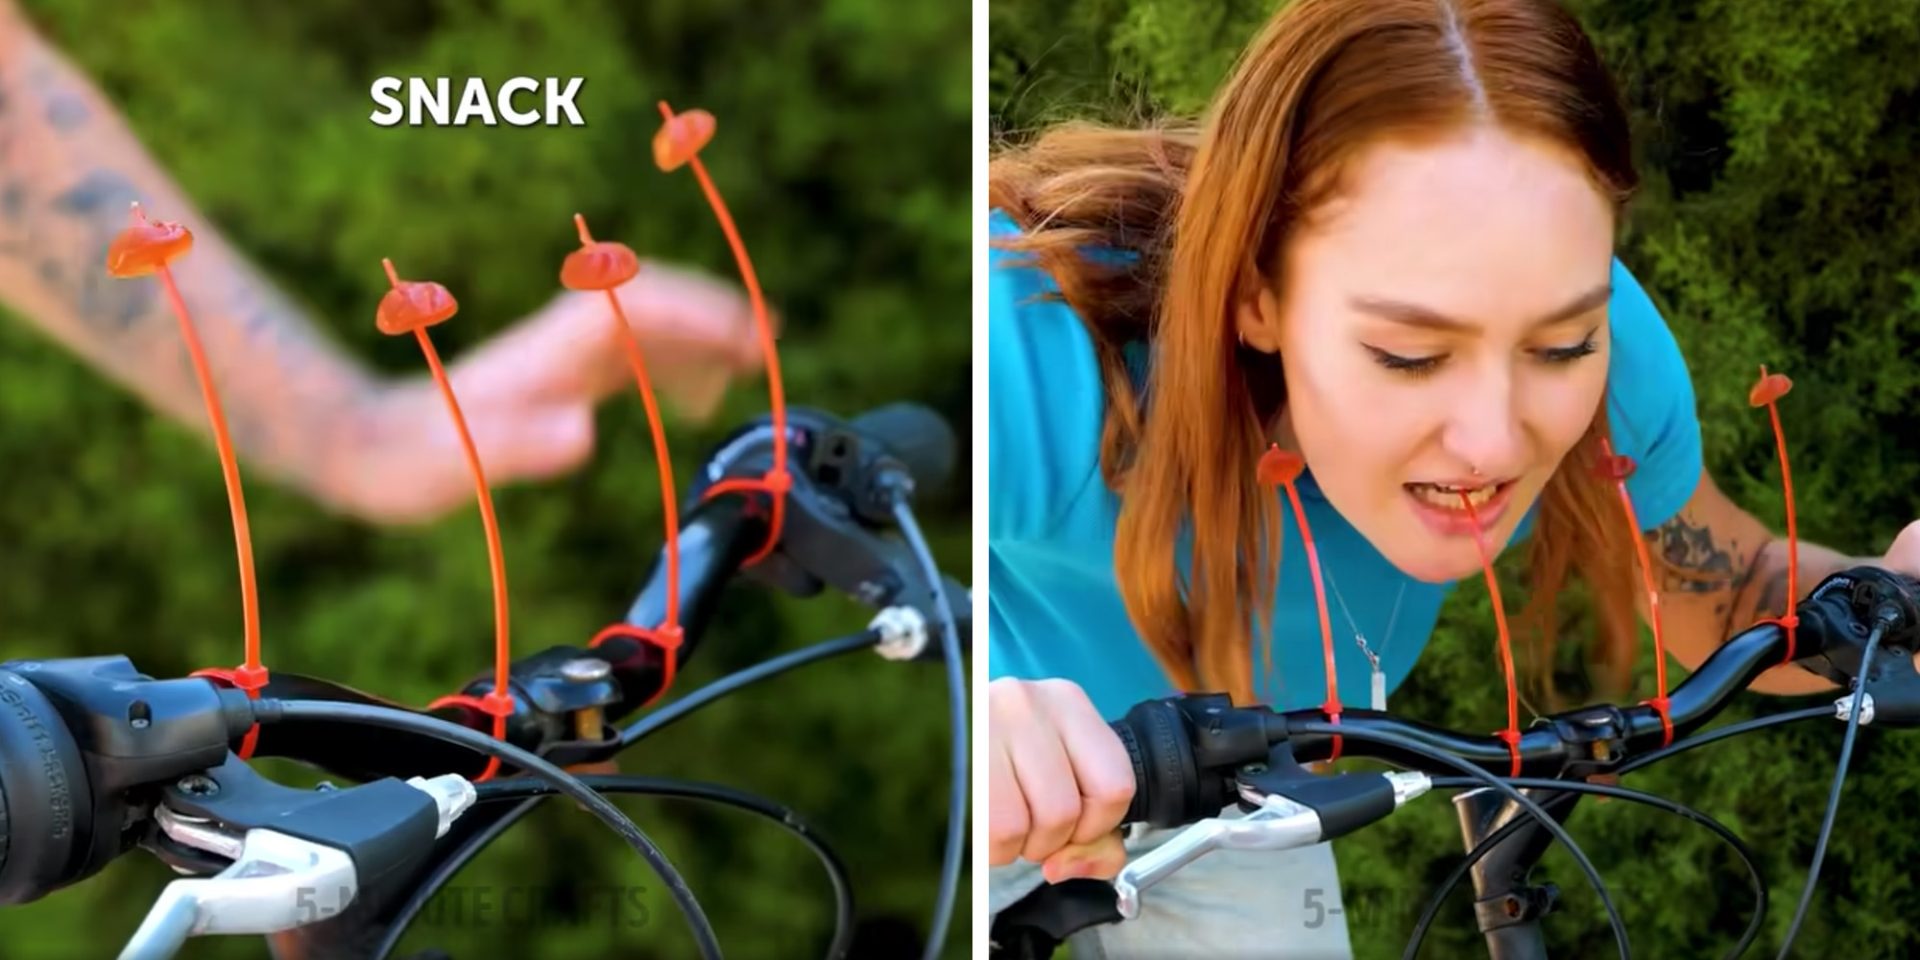 Composite image. Left: someone has attached small gummy sweets onto the end of cable ties, which are protruding up off the handlebar like a series of antennas. Subtitle reads "snack". Right: the rider leans over and bites a gummy sweet off a cable tie.